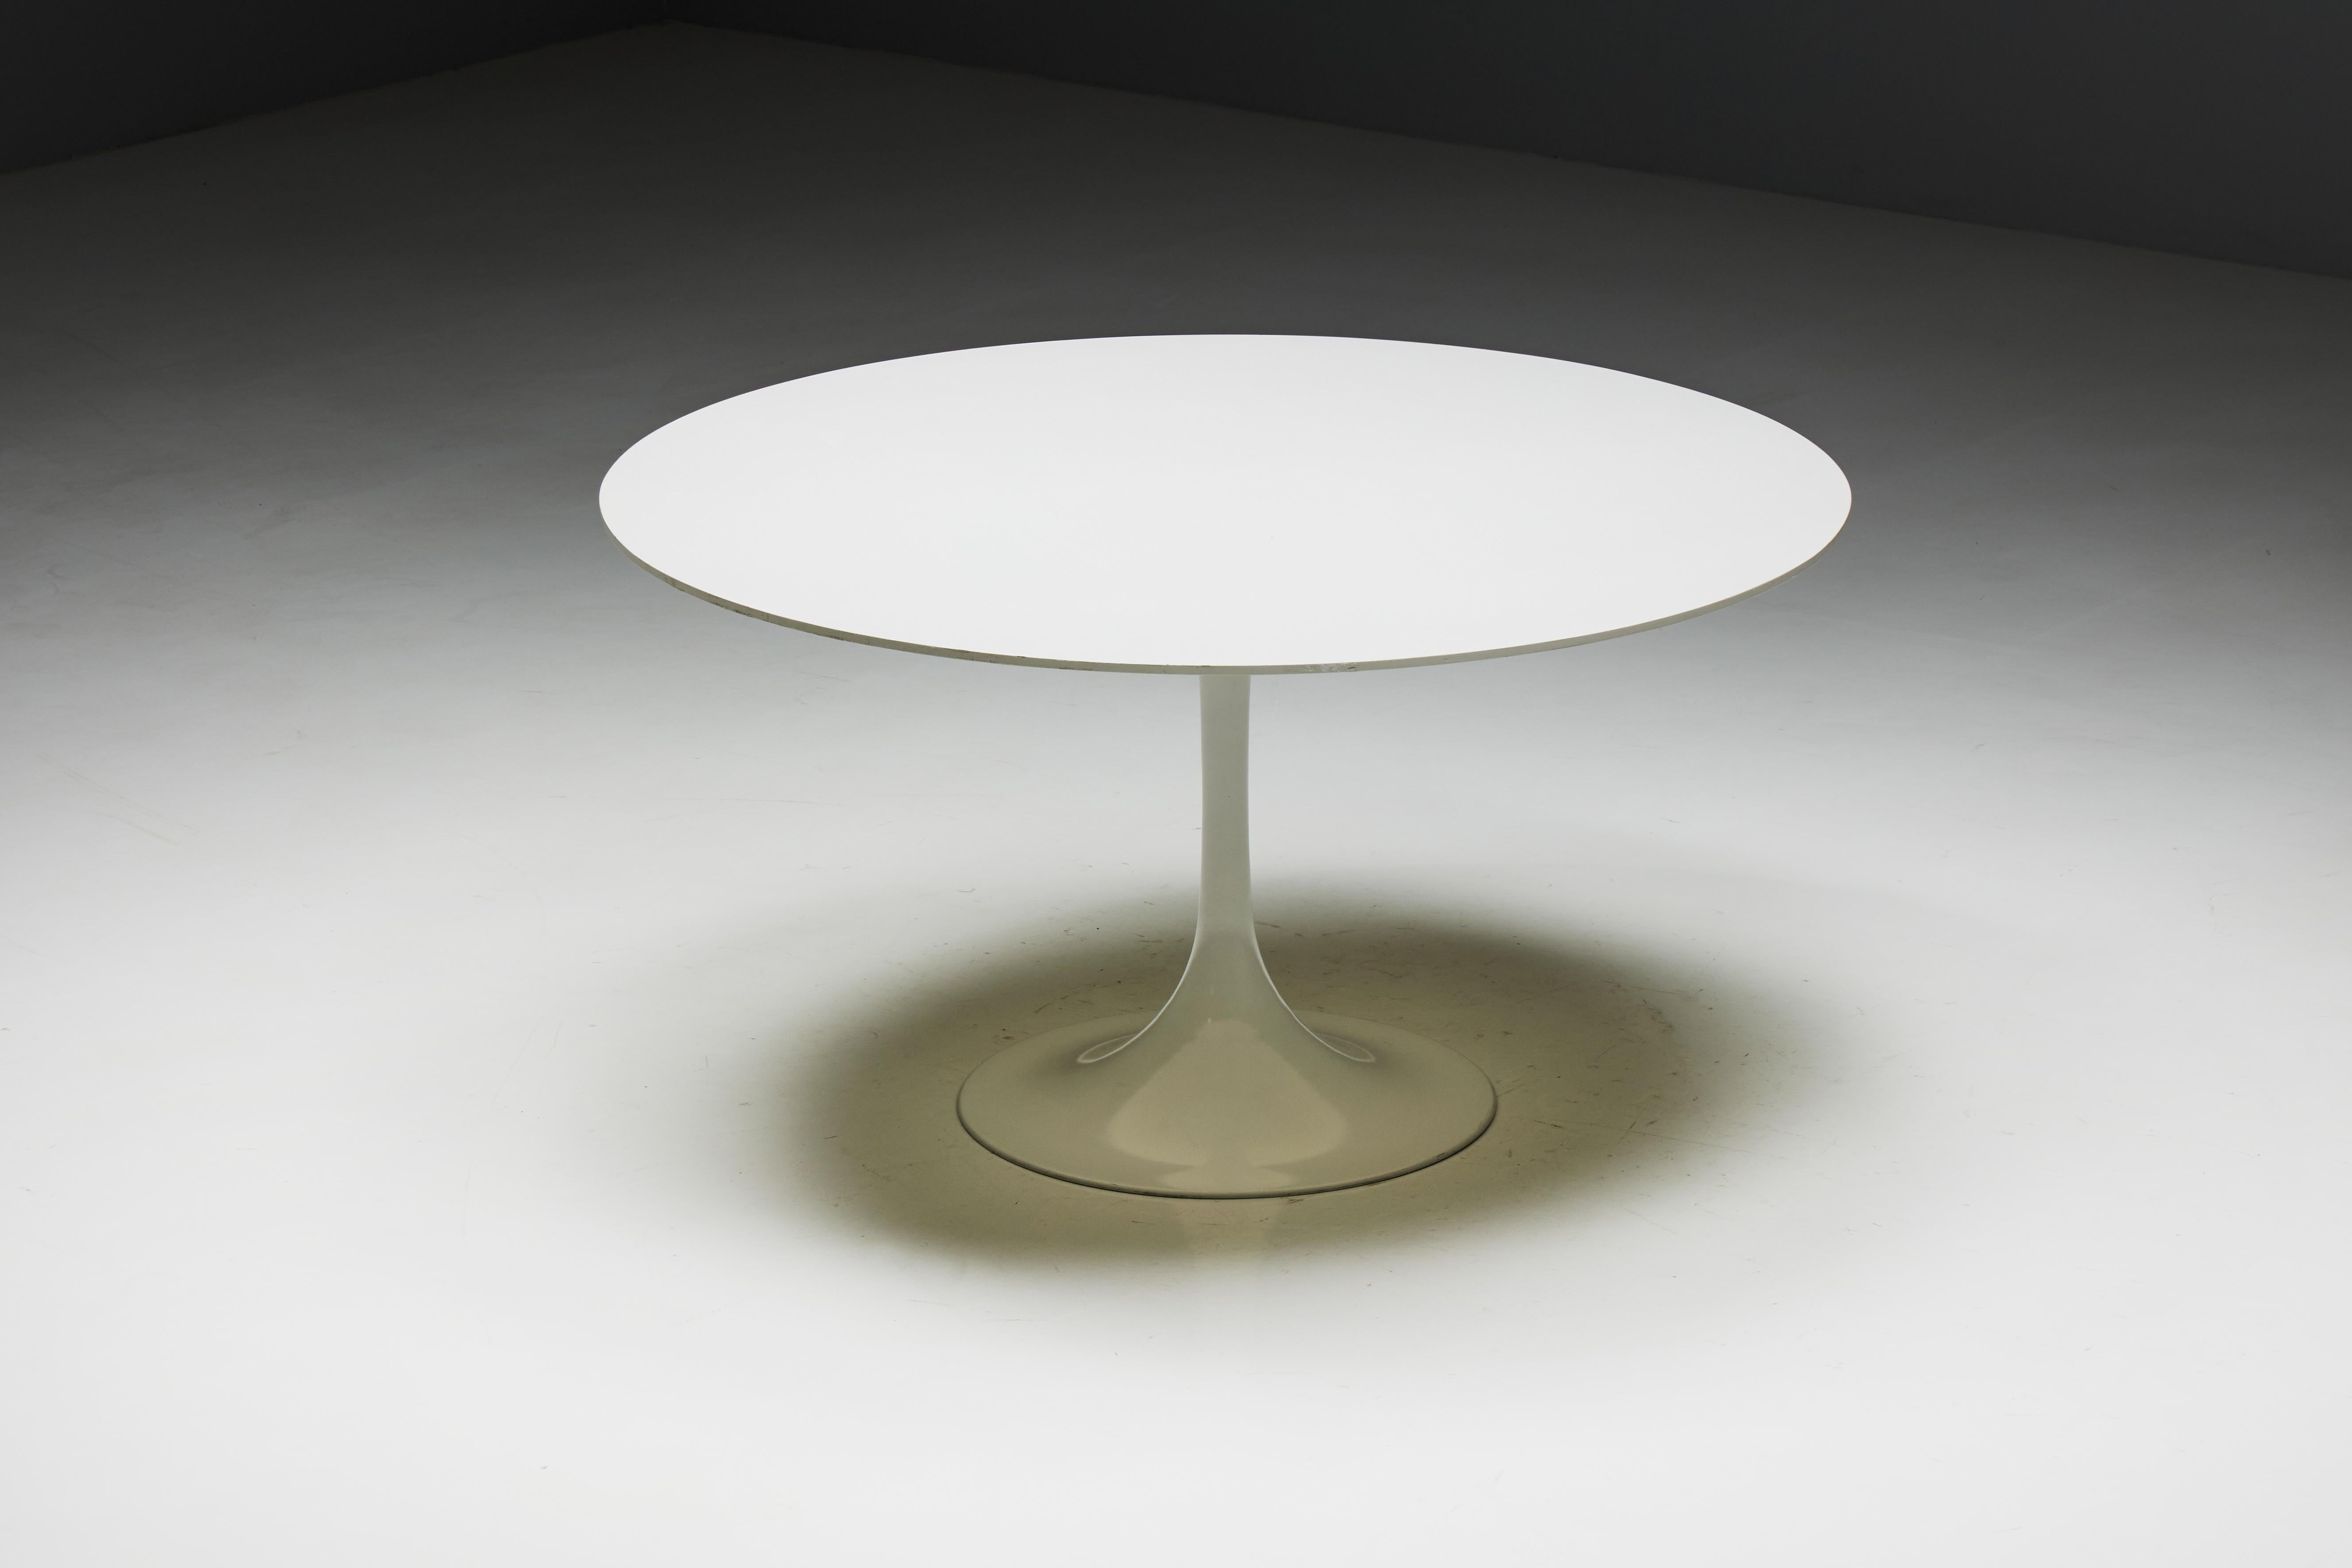 Tulip Dining Table by Eero Saarinen for Knoll, United States, 1960s For Sale 2